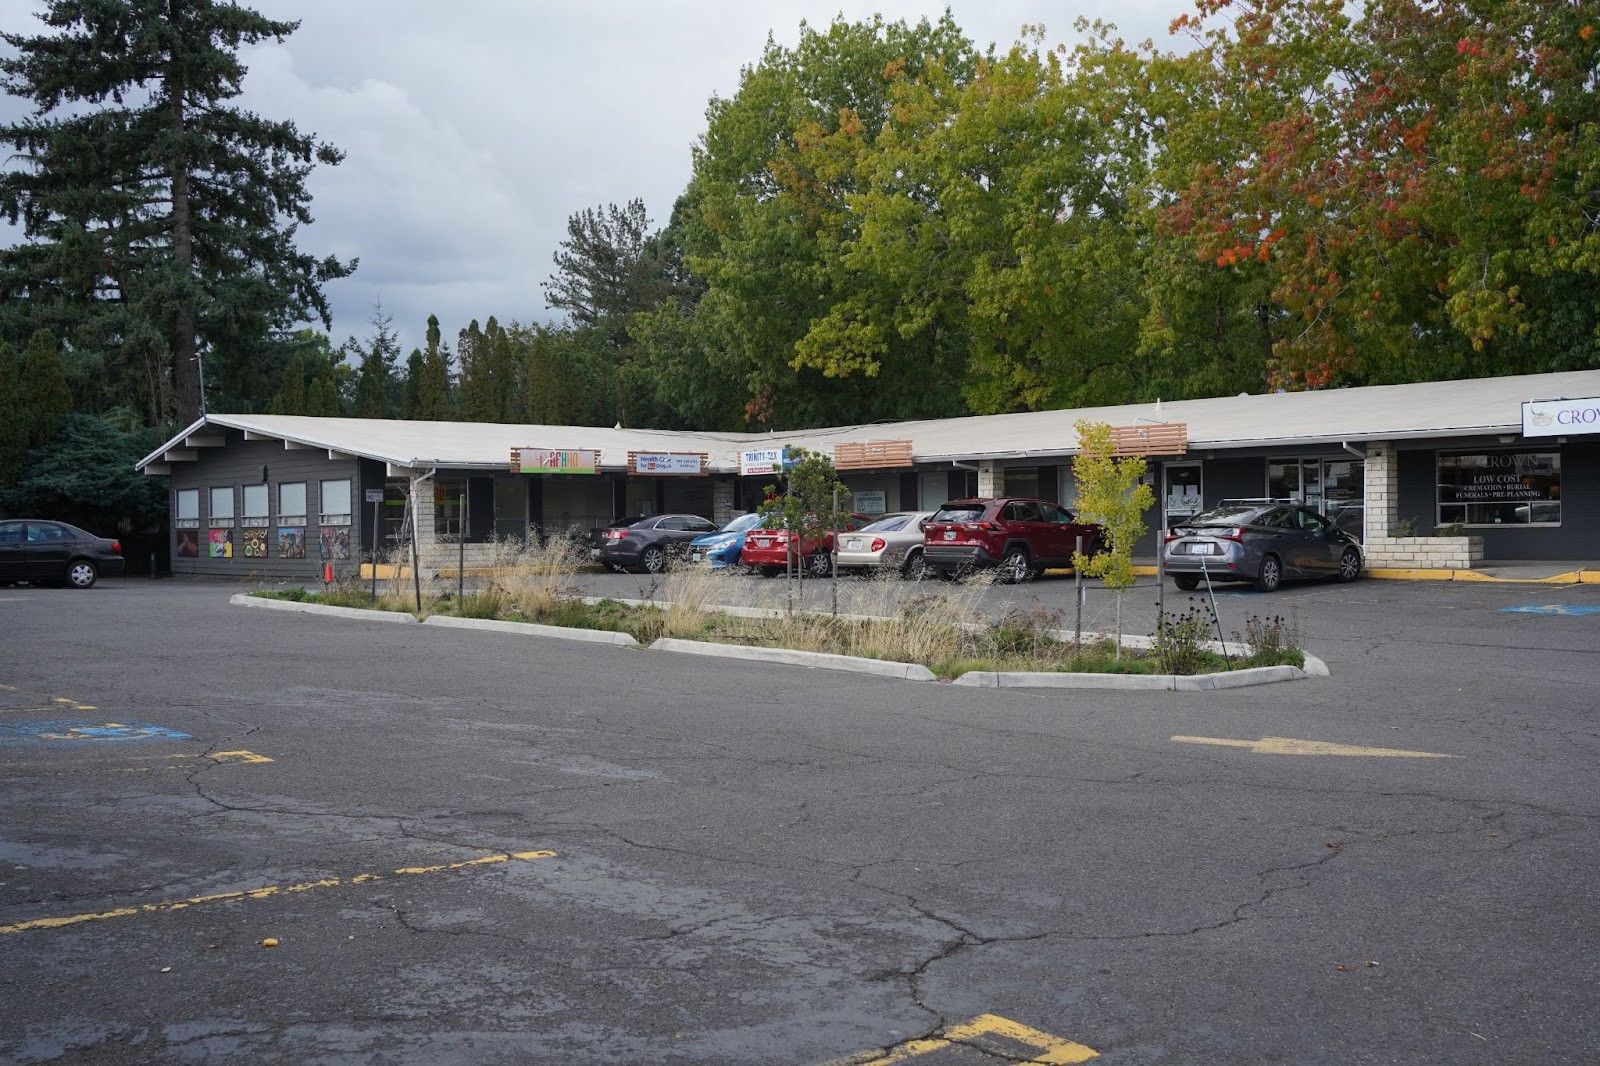 Photograph of a low-rise strip mall in the background of a large parking lot.